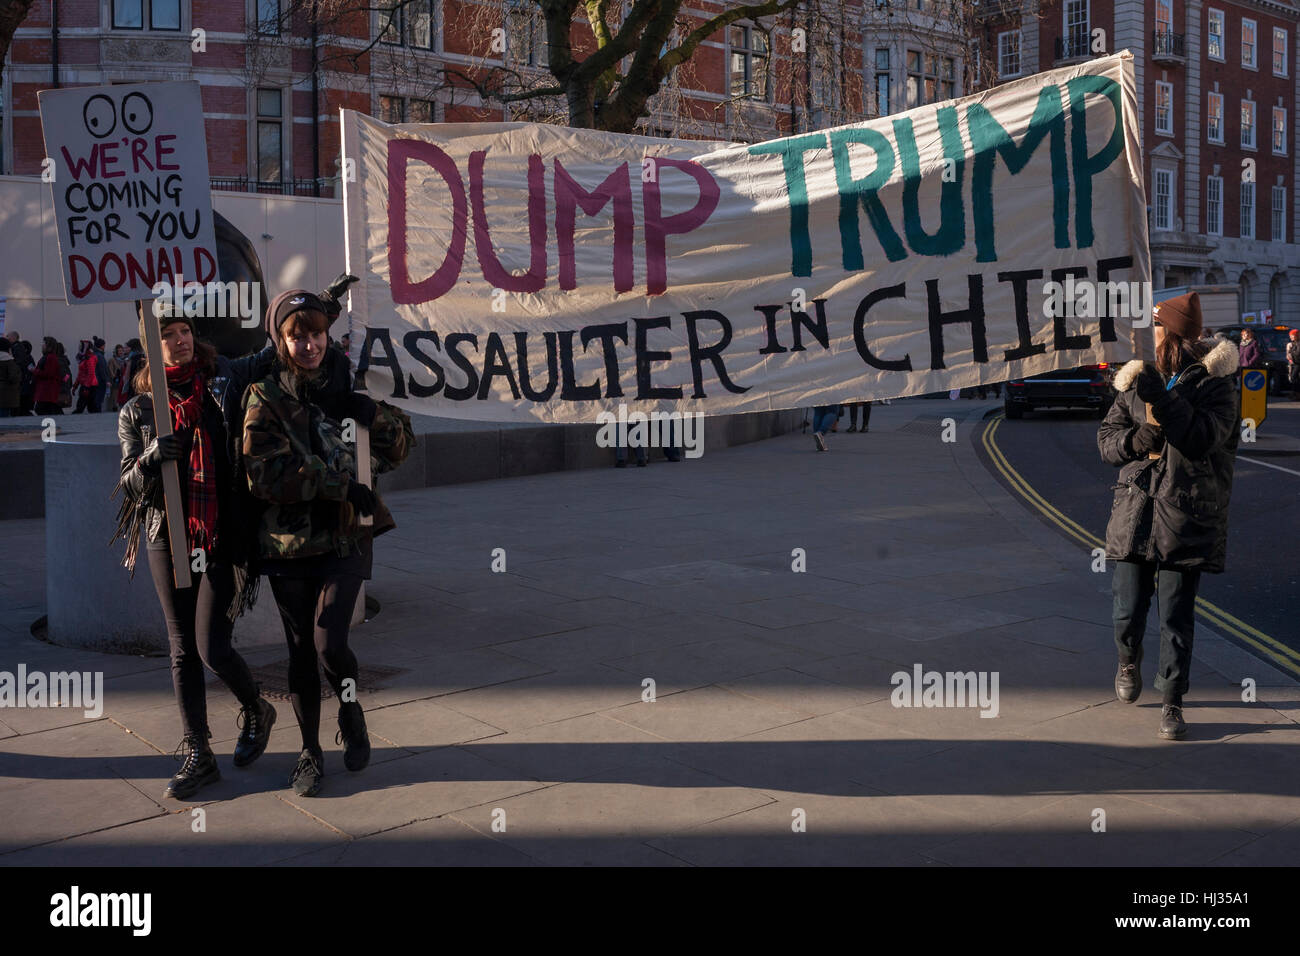 Women protesters march through central London as part of an international campaign on the first full day of Donald Trump's presidency, on 21st January 2017, in London, England. They marched from the US embassy in Mayfair, to Trafalgar Square for a rally, held in solidarity with a march in Washington and other cities around the world. Organisers say it highlighted women's rights, which they perceive to be under threat from the new US administration. London organisers announced on stage that between 80,000 and 100,000 people - which included both men and women - had taken part in the rally. Stock Photo